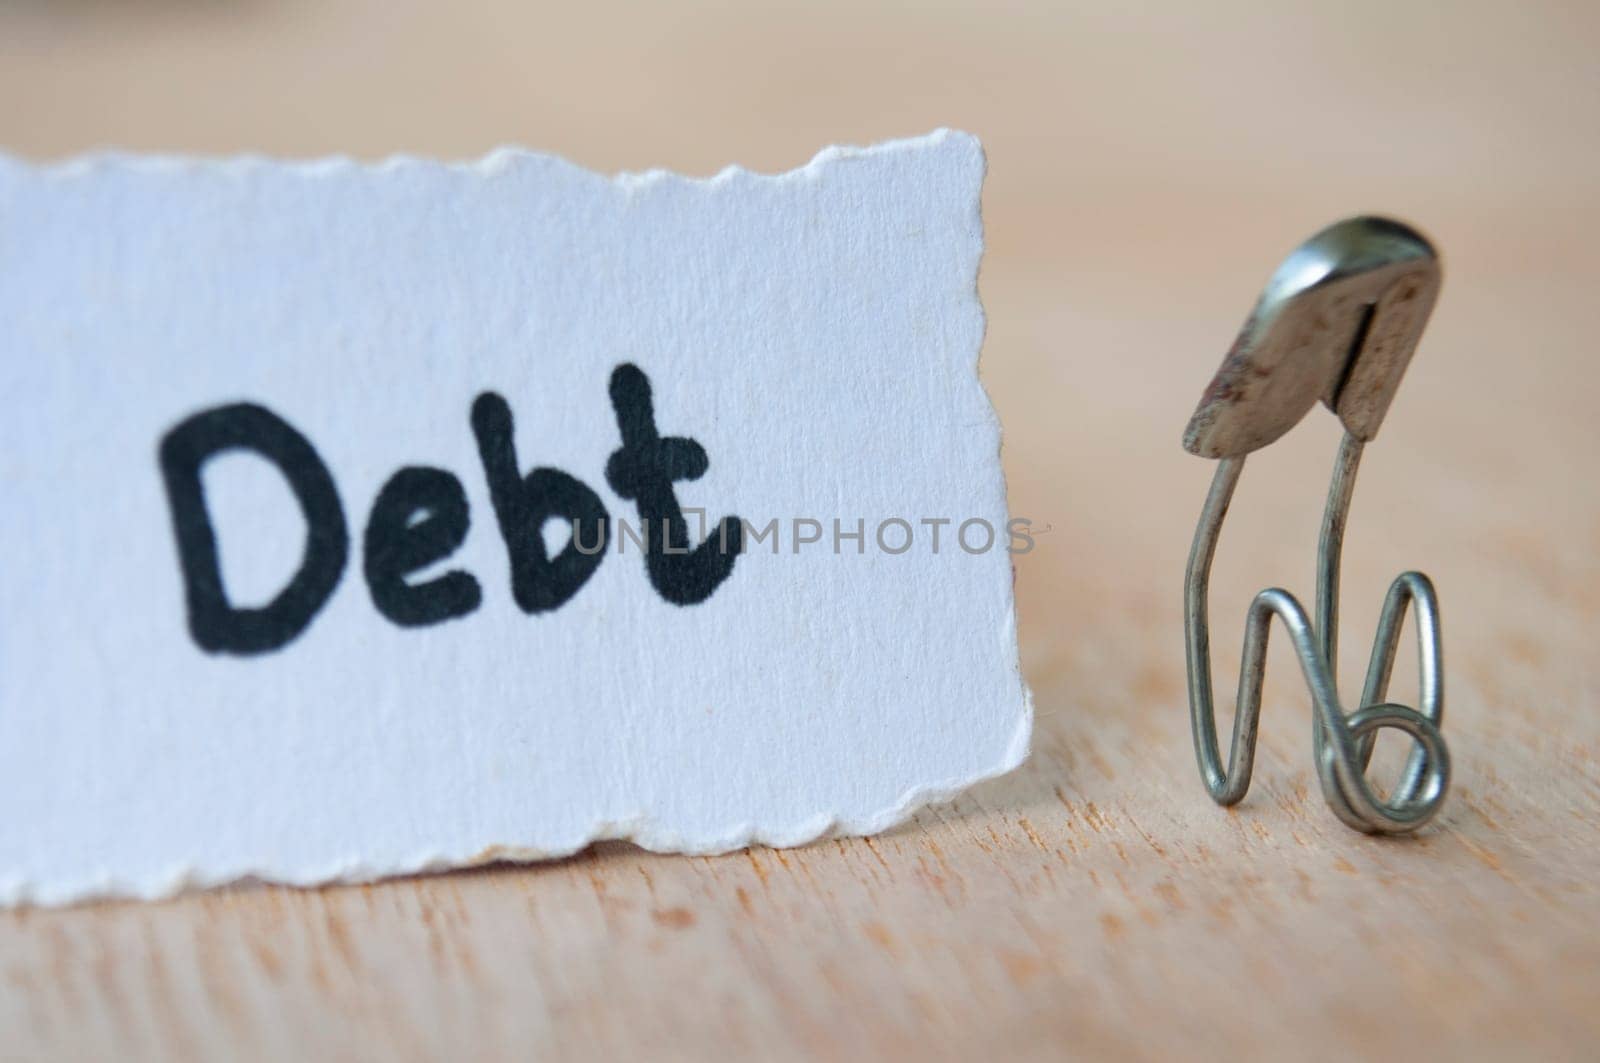 A pin representing a stressful person being having too many debts.